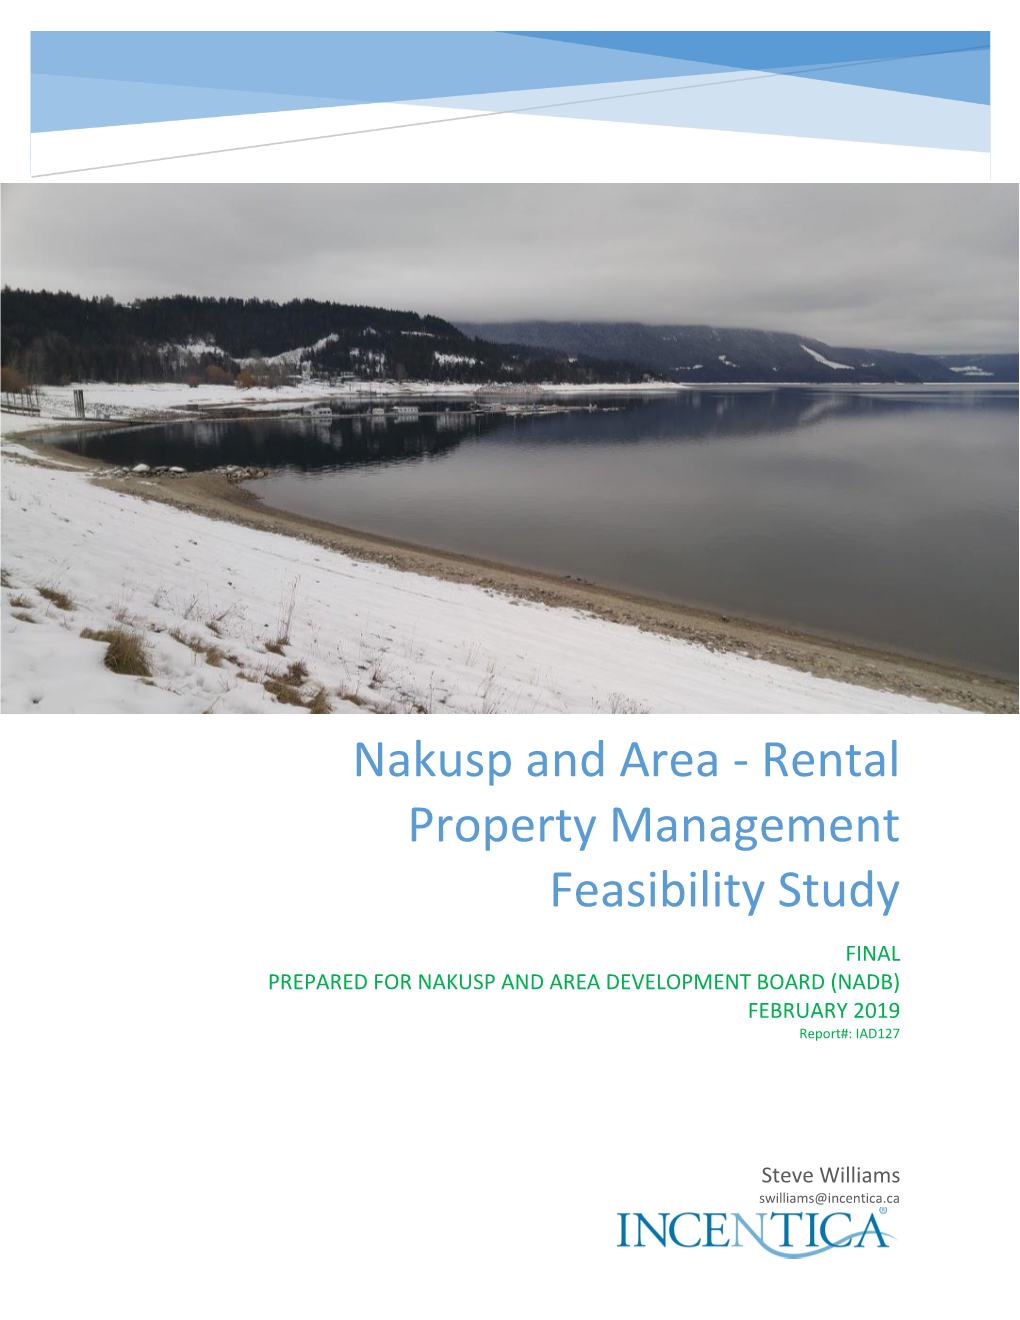 Nakusp and Area - Rental Property Management Feasibility Study